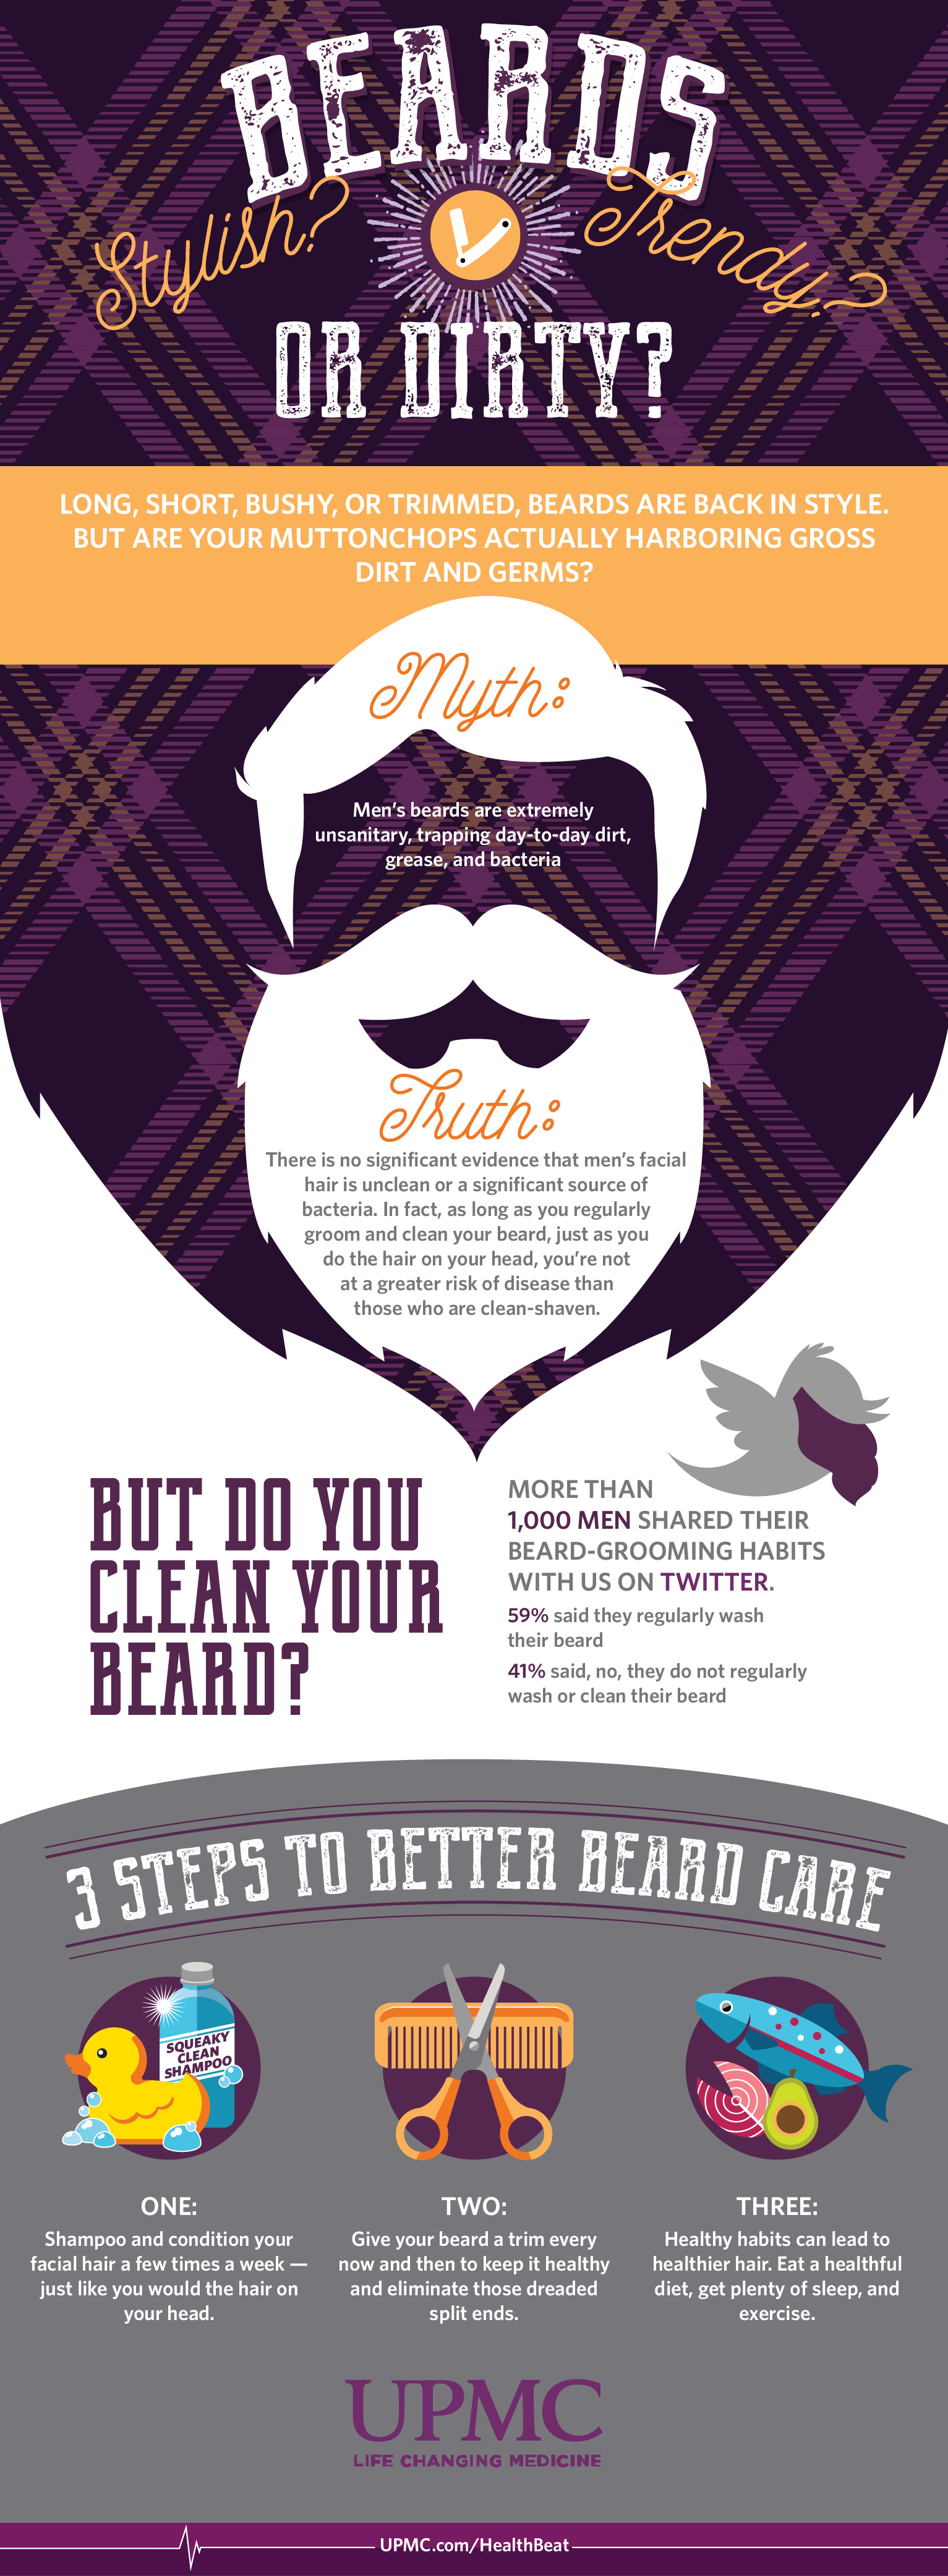 Learn more about germs and beards